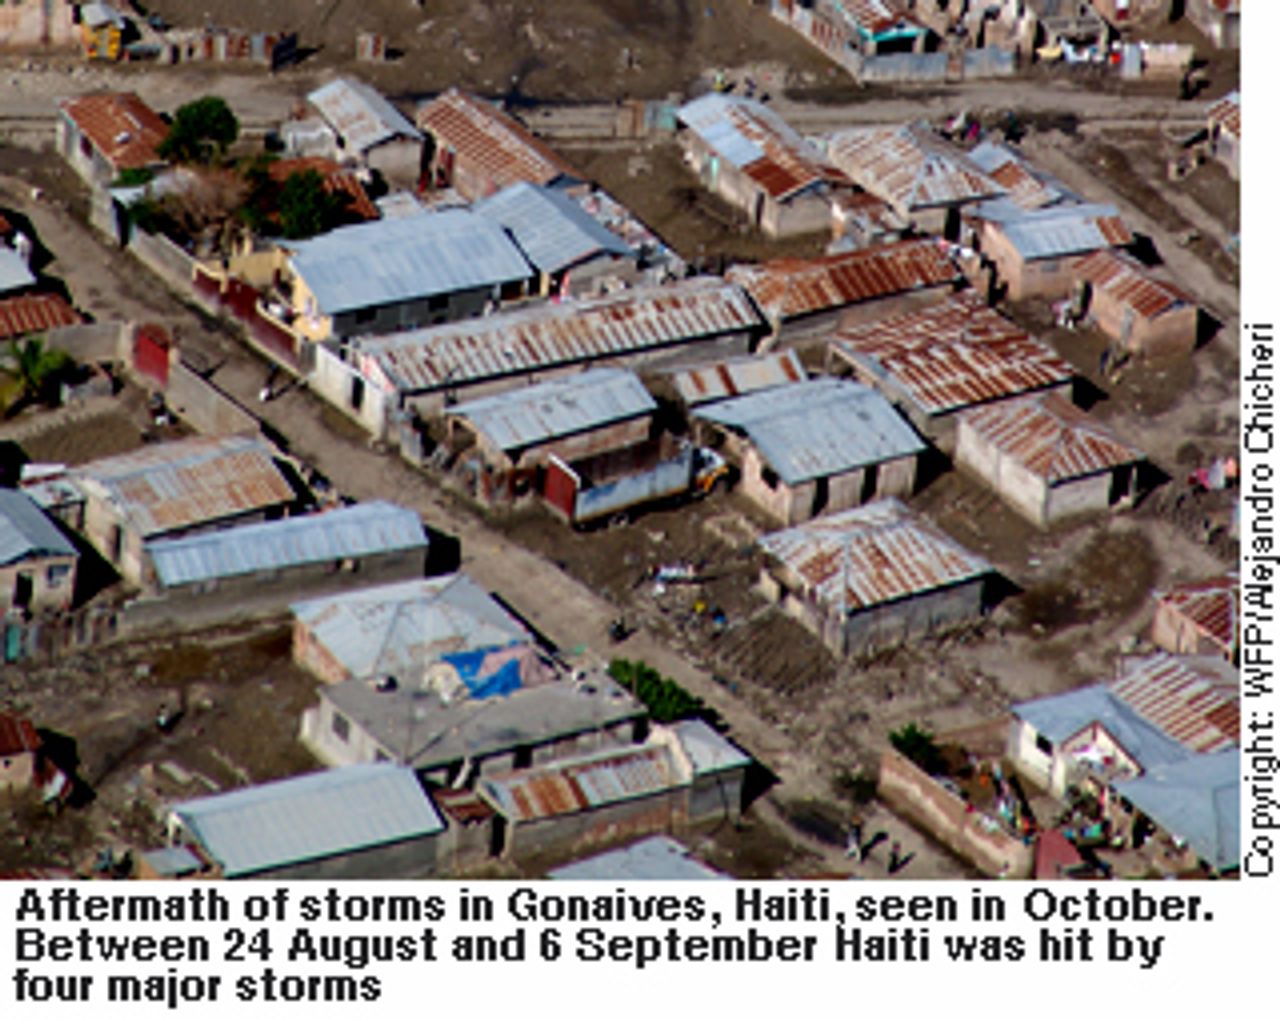 Gonaives after storms